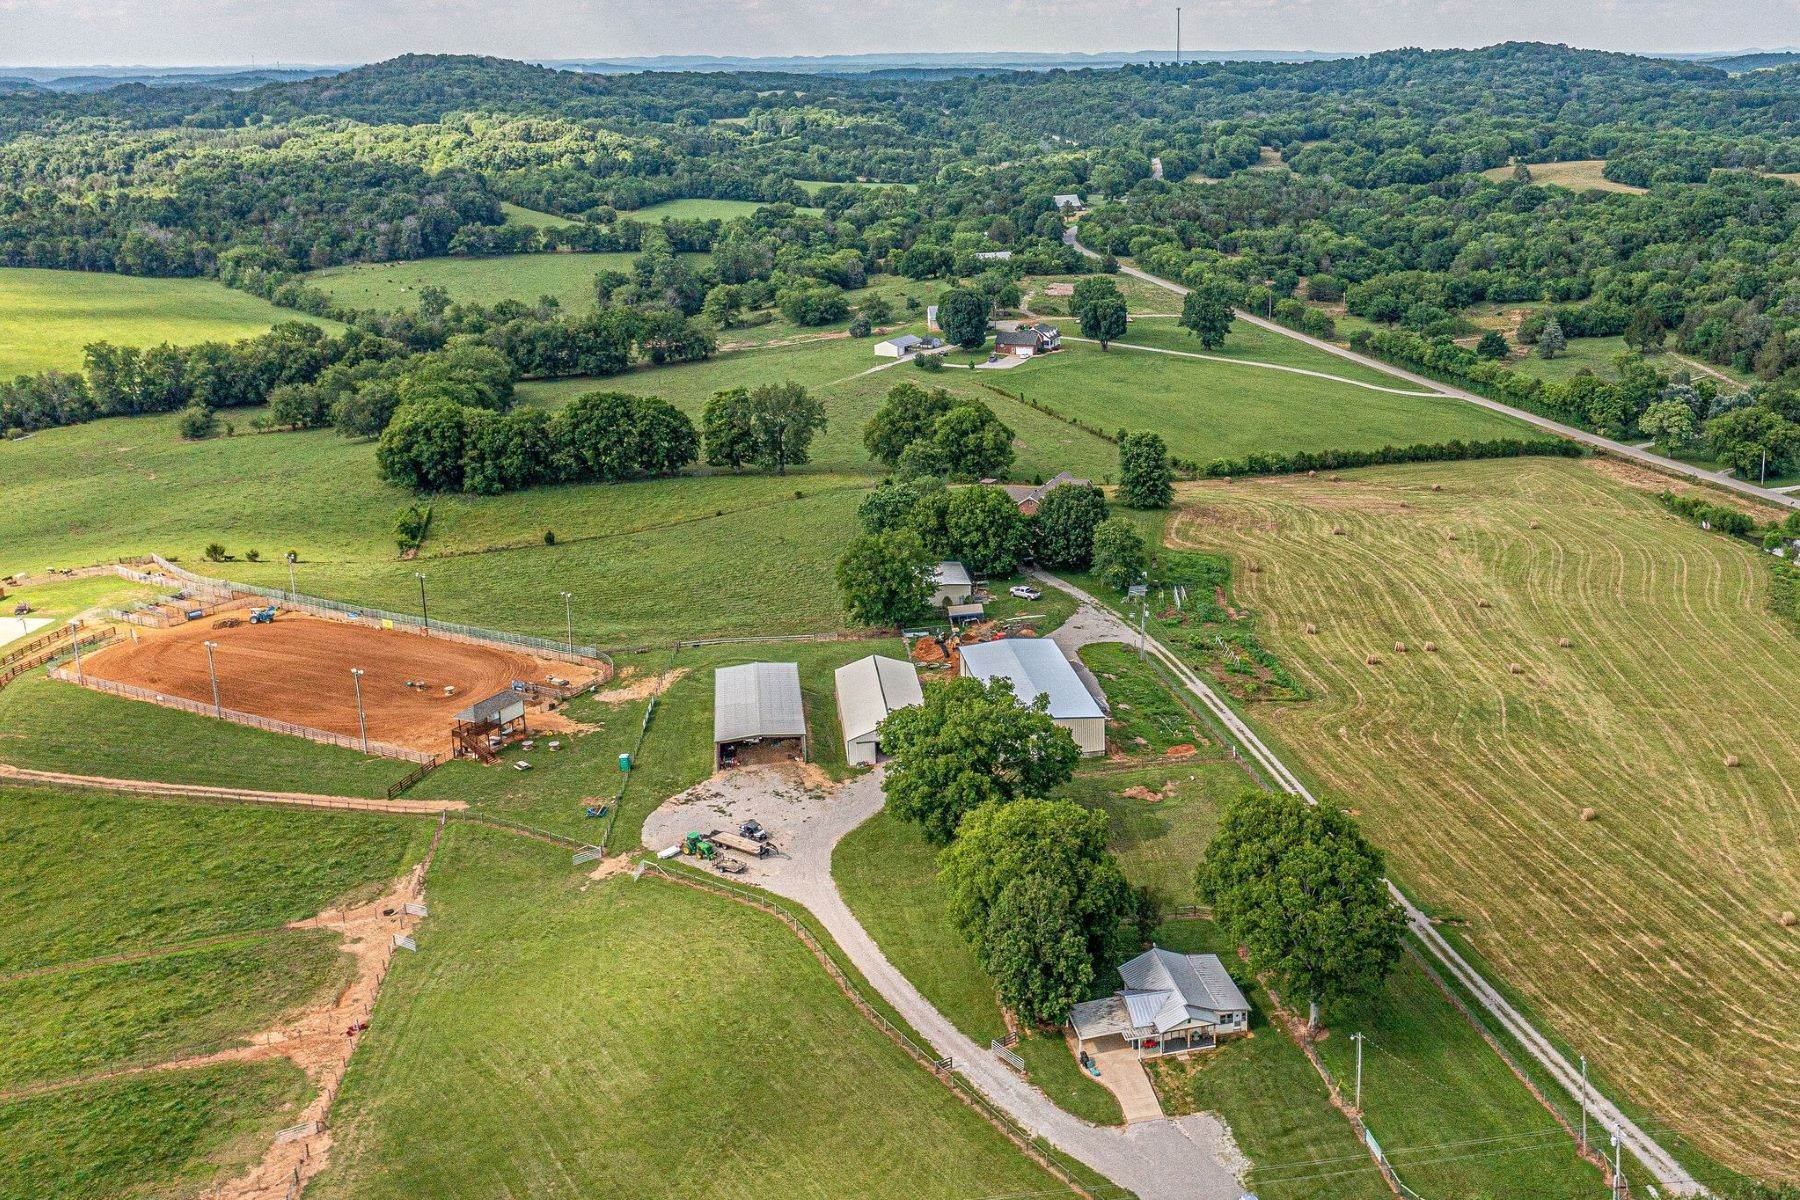 17. Farm and Ranch Properties for Sale at 0 Pickle Rd, Culleoka, TN, 38451 0 Pickle Rd Lot 061 Culleoka, Tennessee 38451 United States